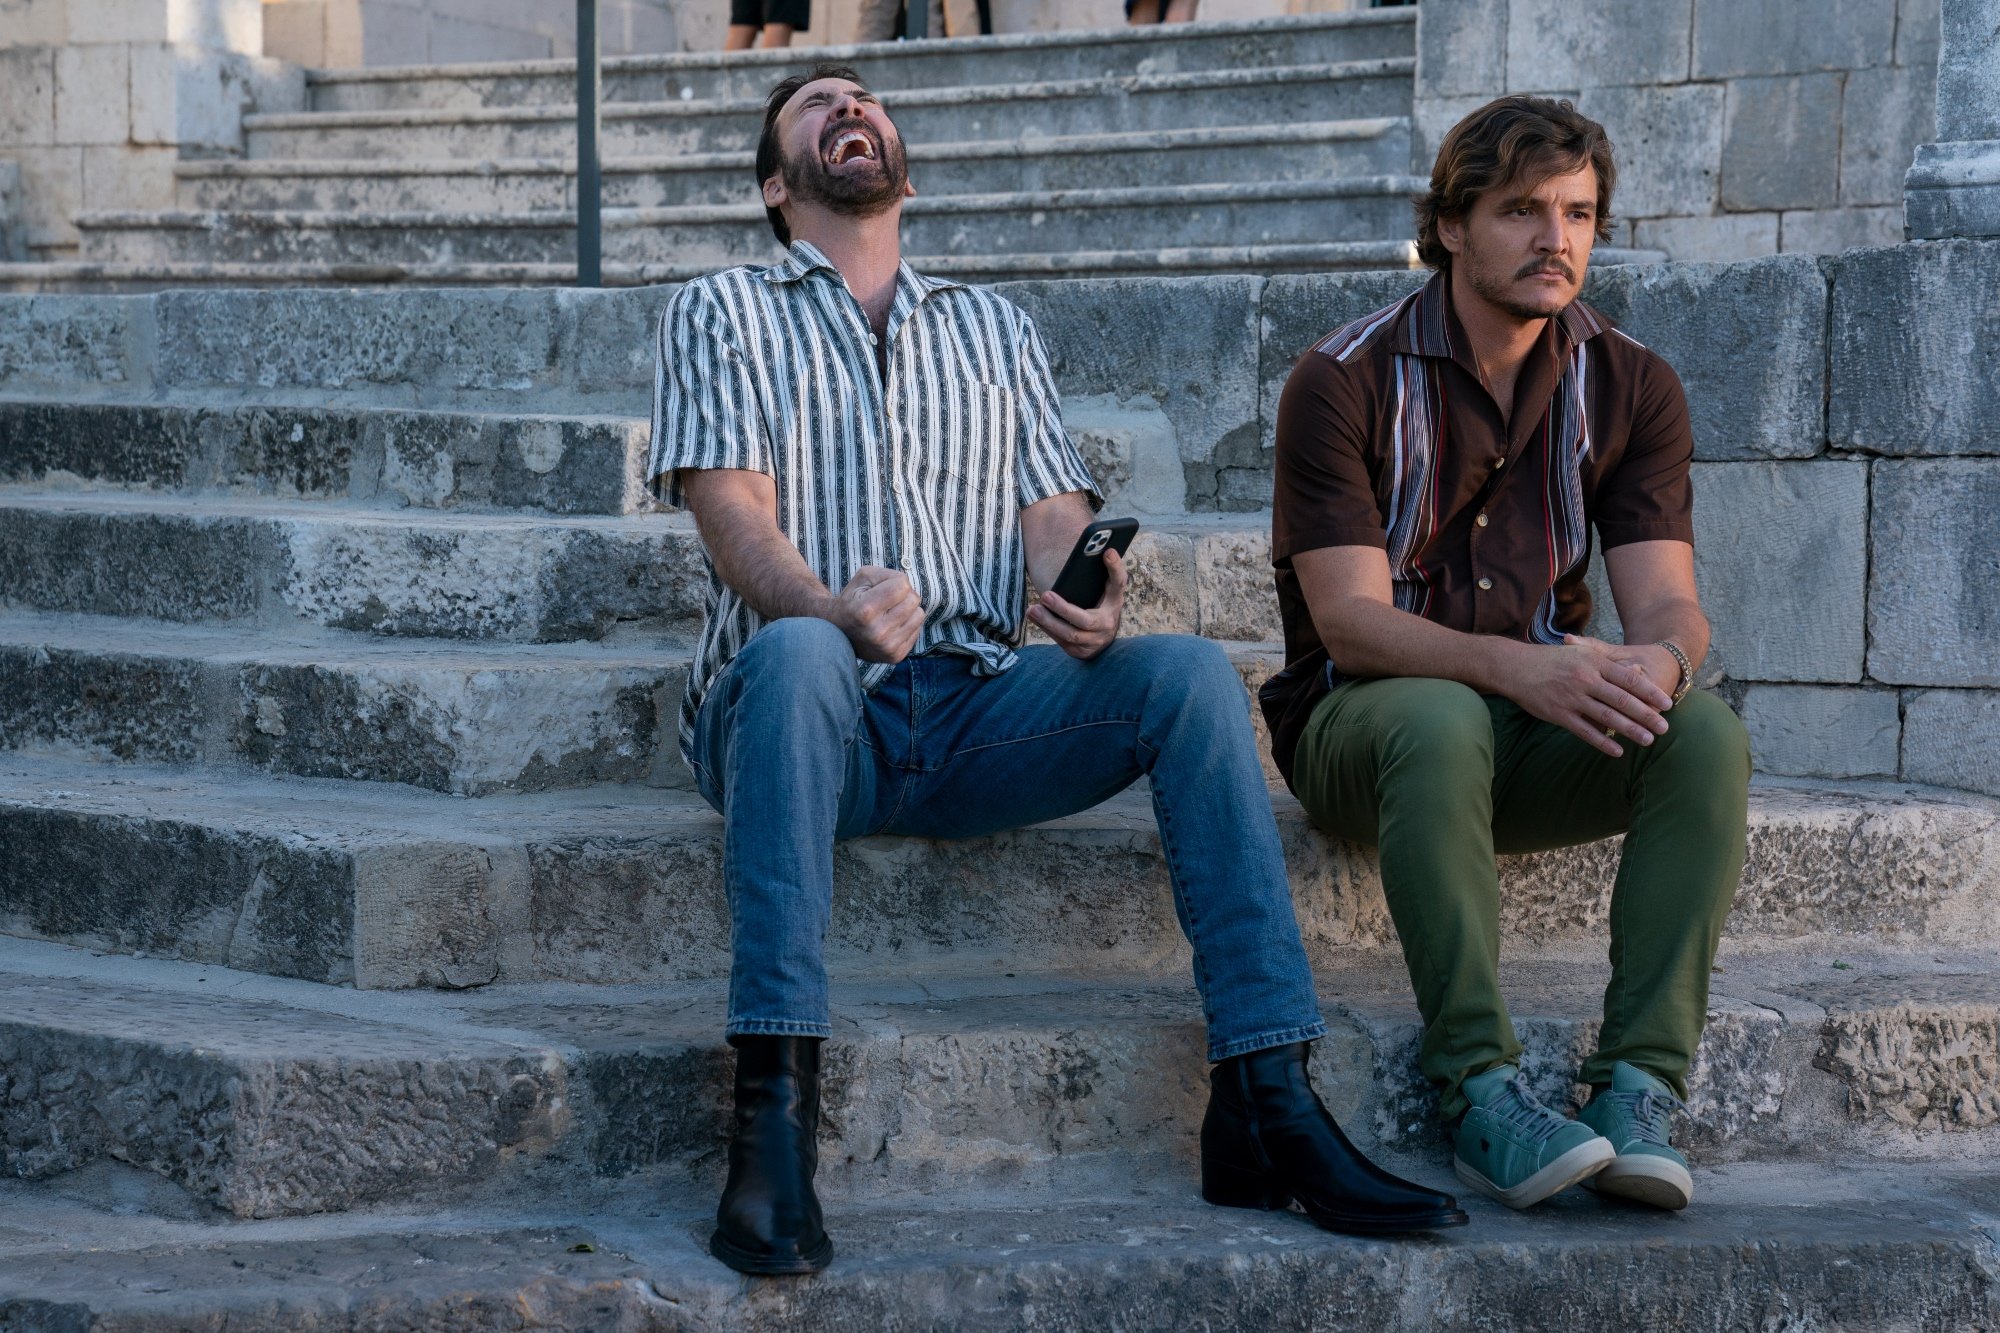 'The Unbearable Weight of Massive Talent' Nicolas Cage and Pedro Pascal as Javi Gutierrez sitting on stone stairs with Nicolas laughing and Pedro looking serious